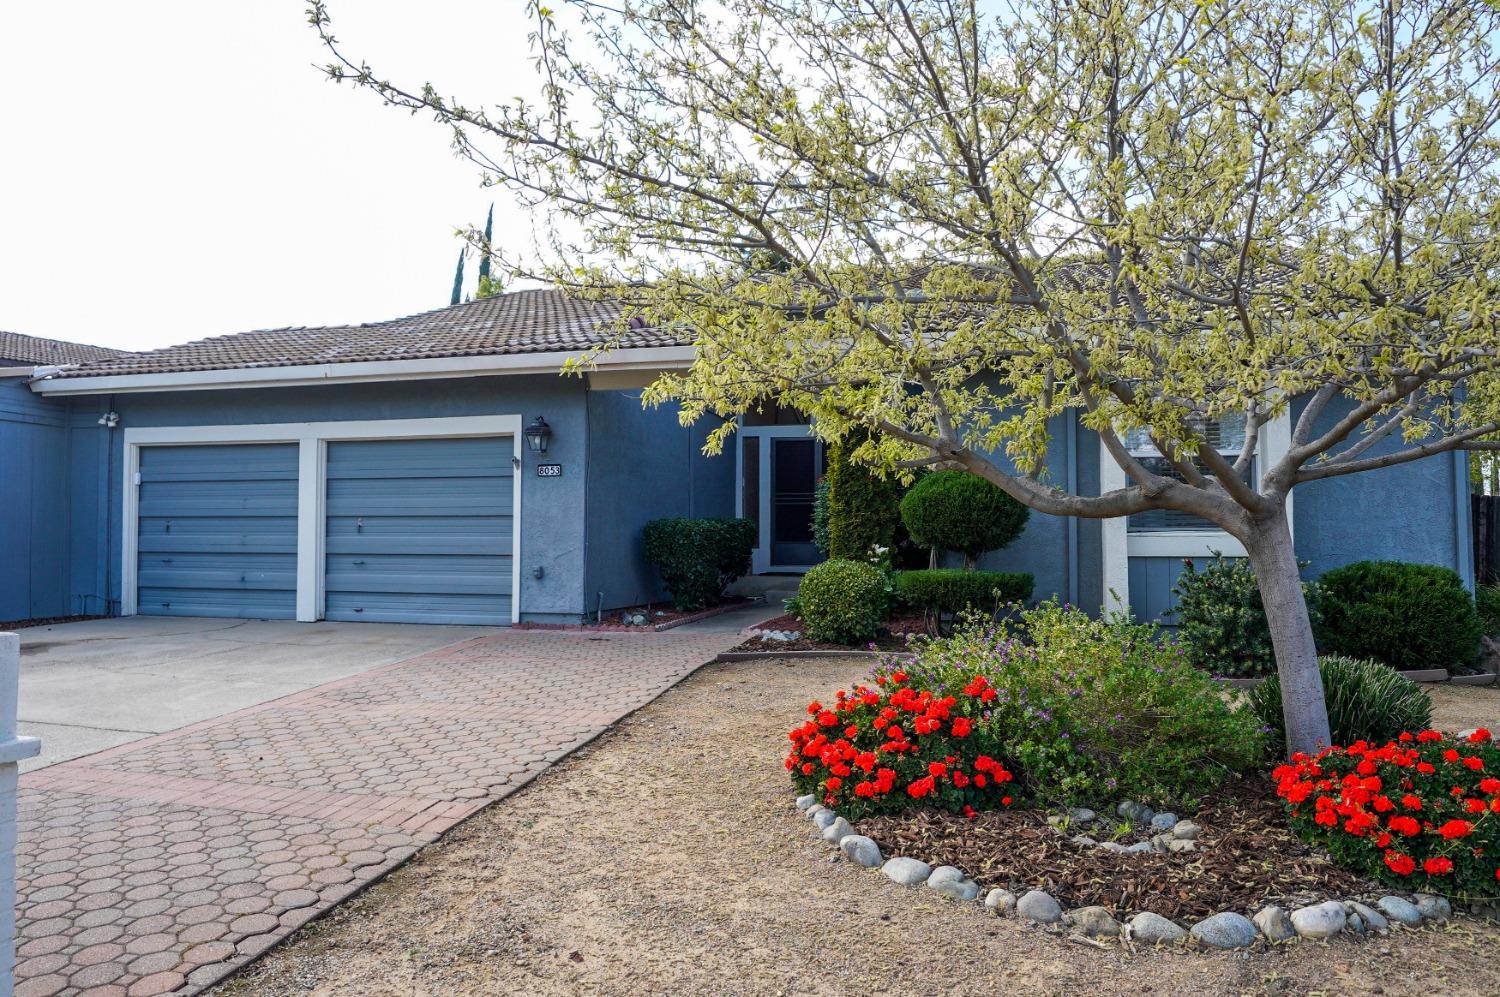 Photo of 8053 Hoopes Dr in Citrus Heights, CA